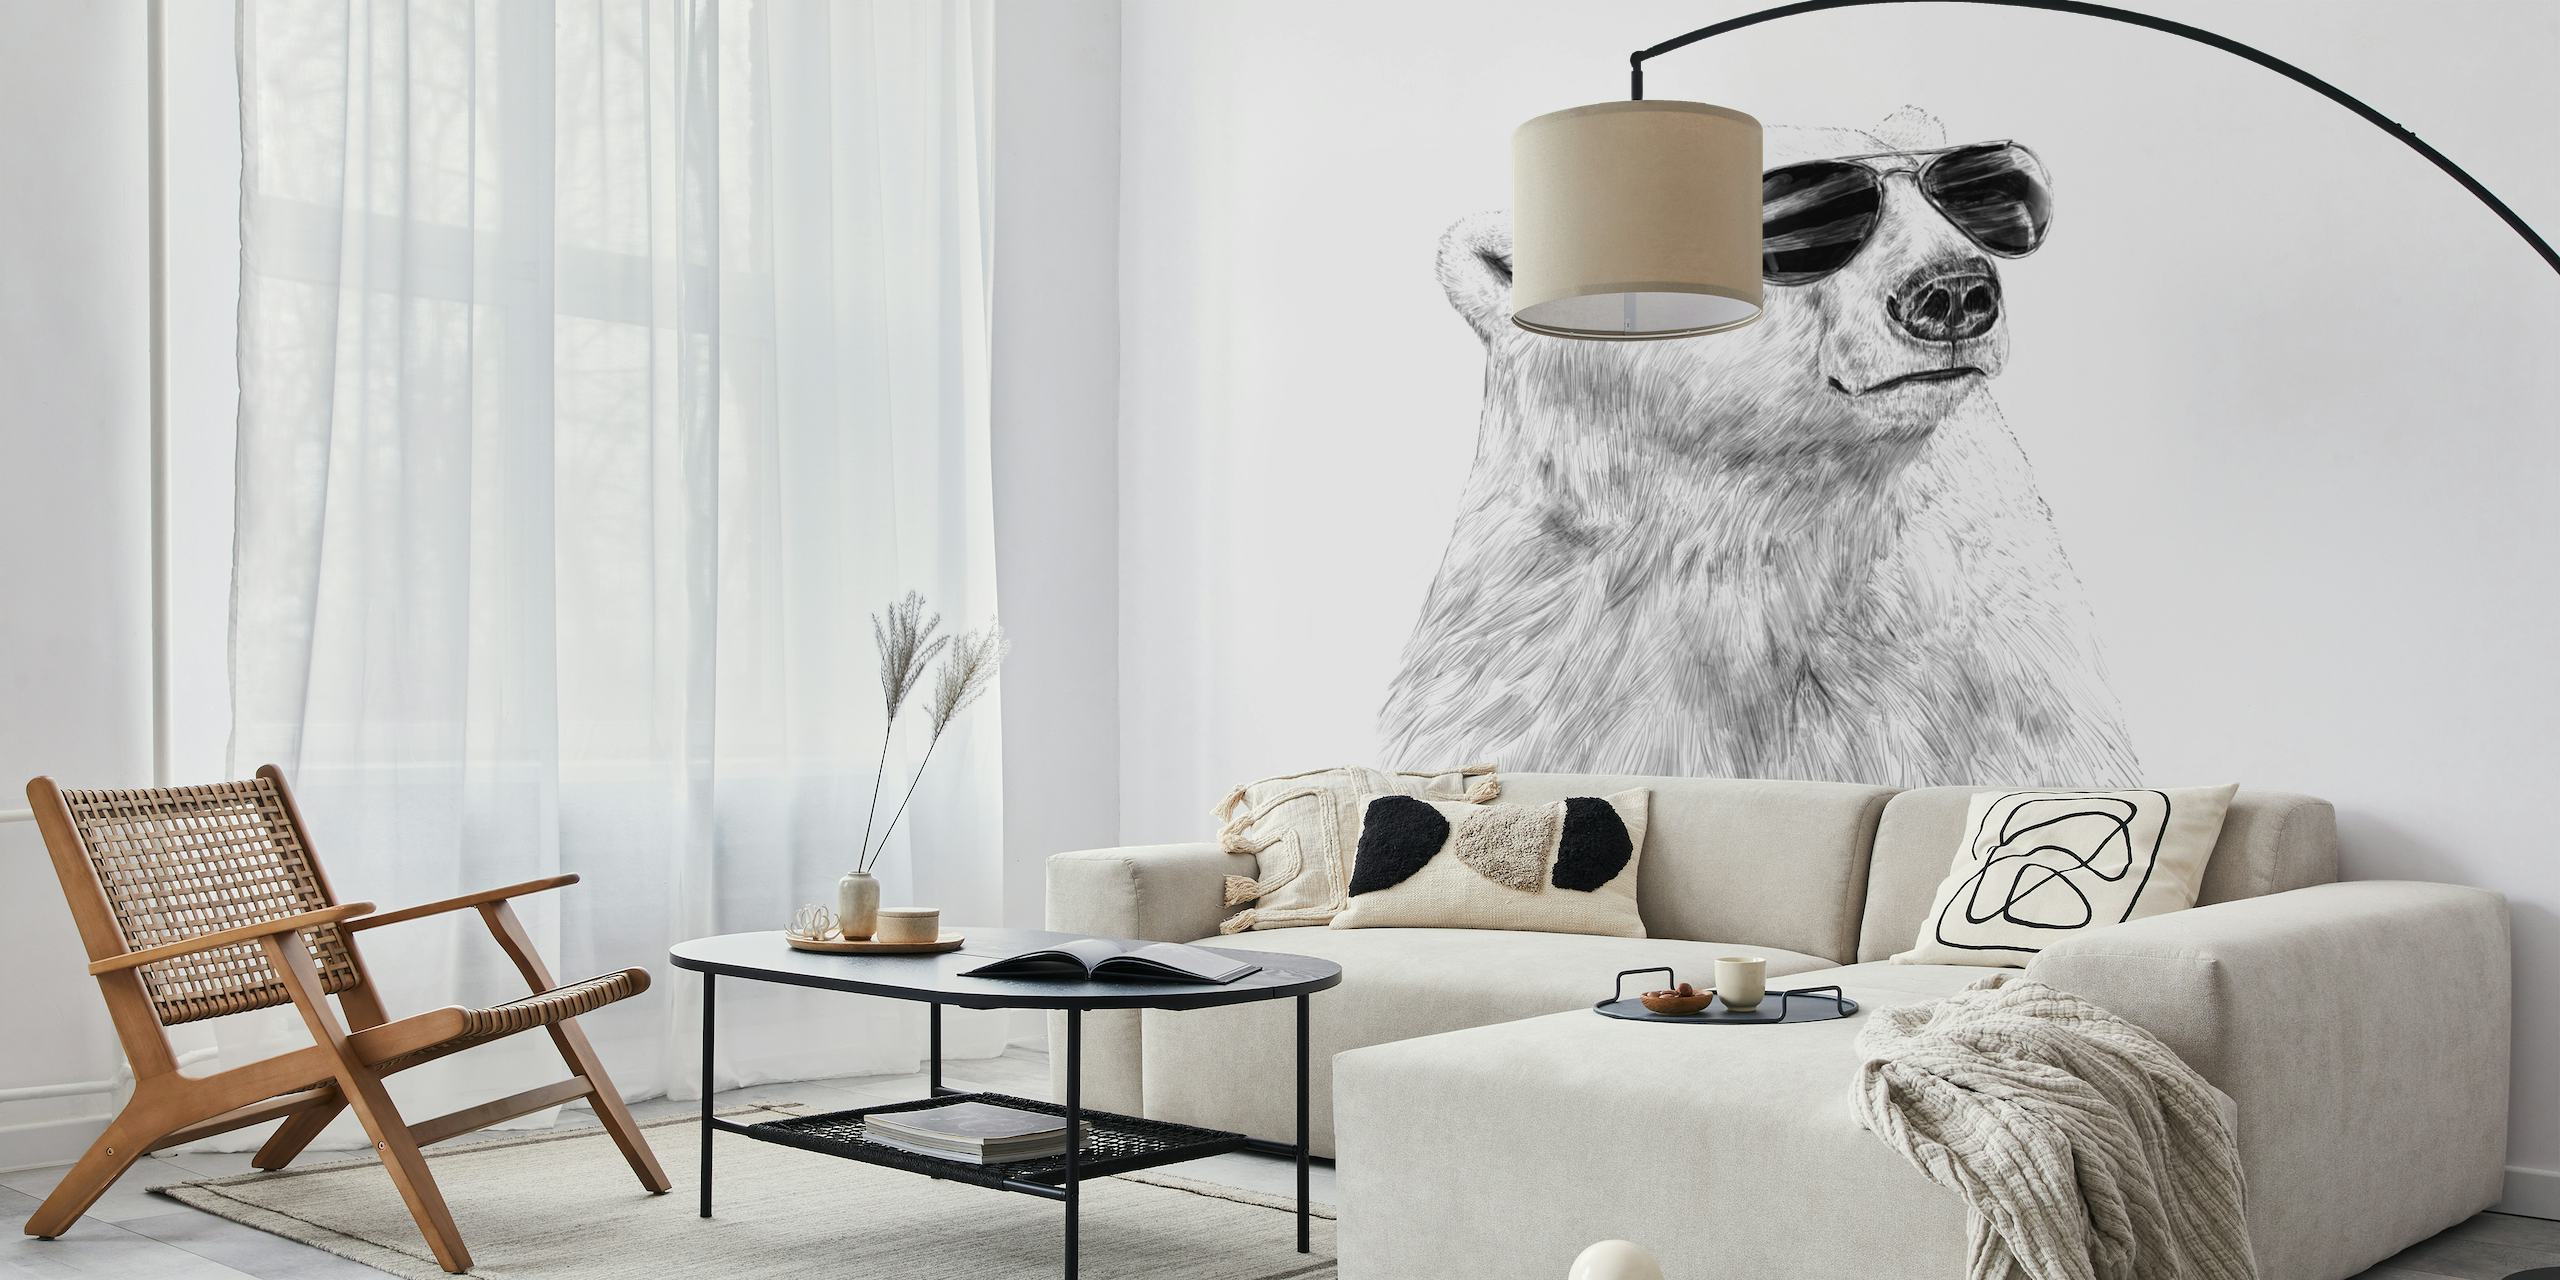 Bear with sunglasses wall mural illustration